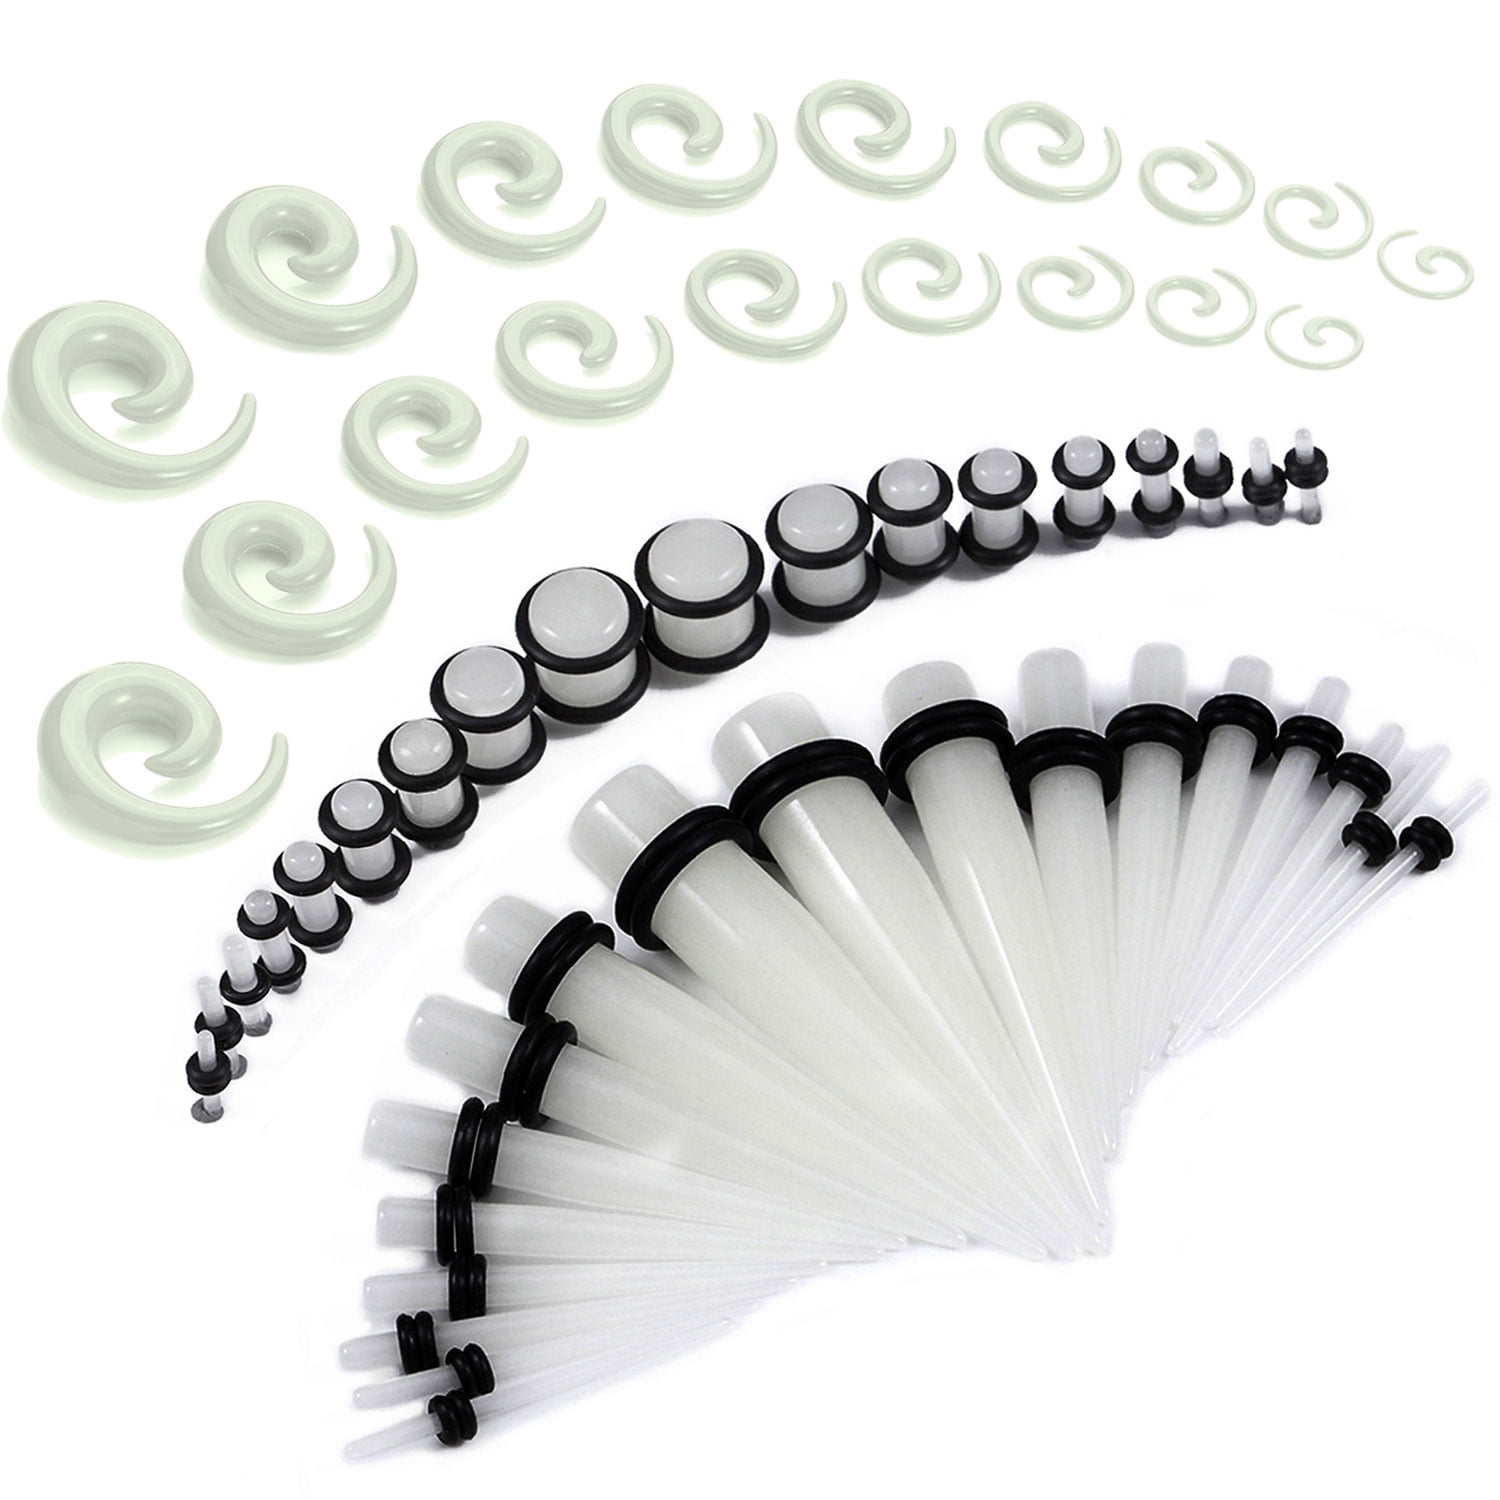 12-54PC Acrylic Ear Gauge Kits 14G-00G Ear Stretching Starter Spiral Tapers Plug 